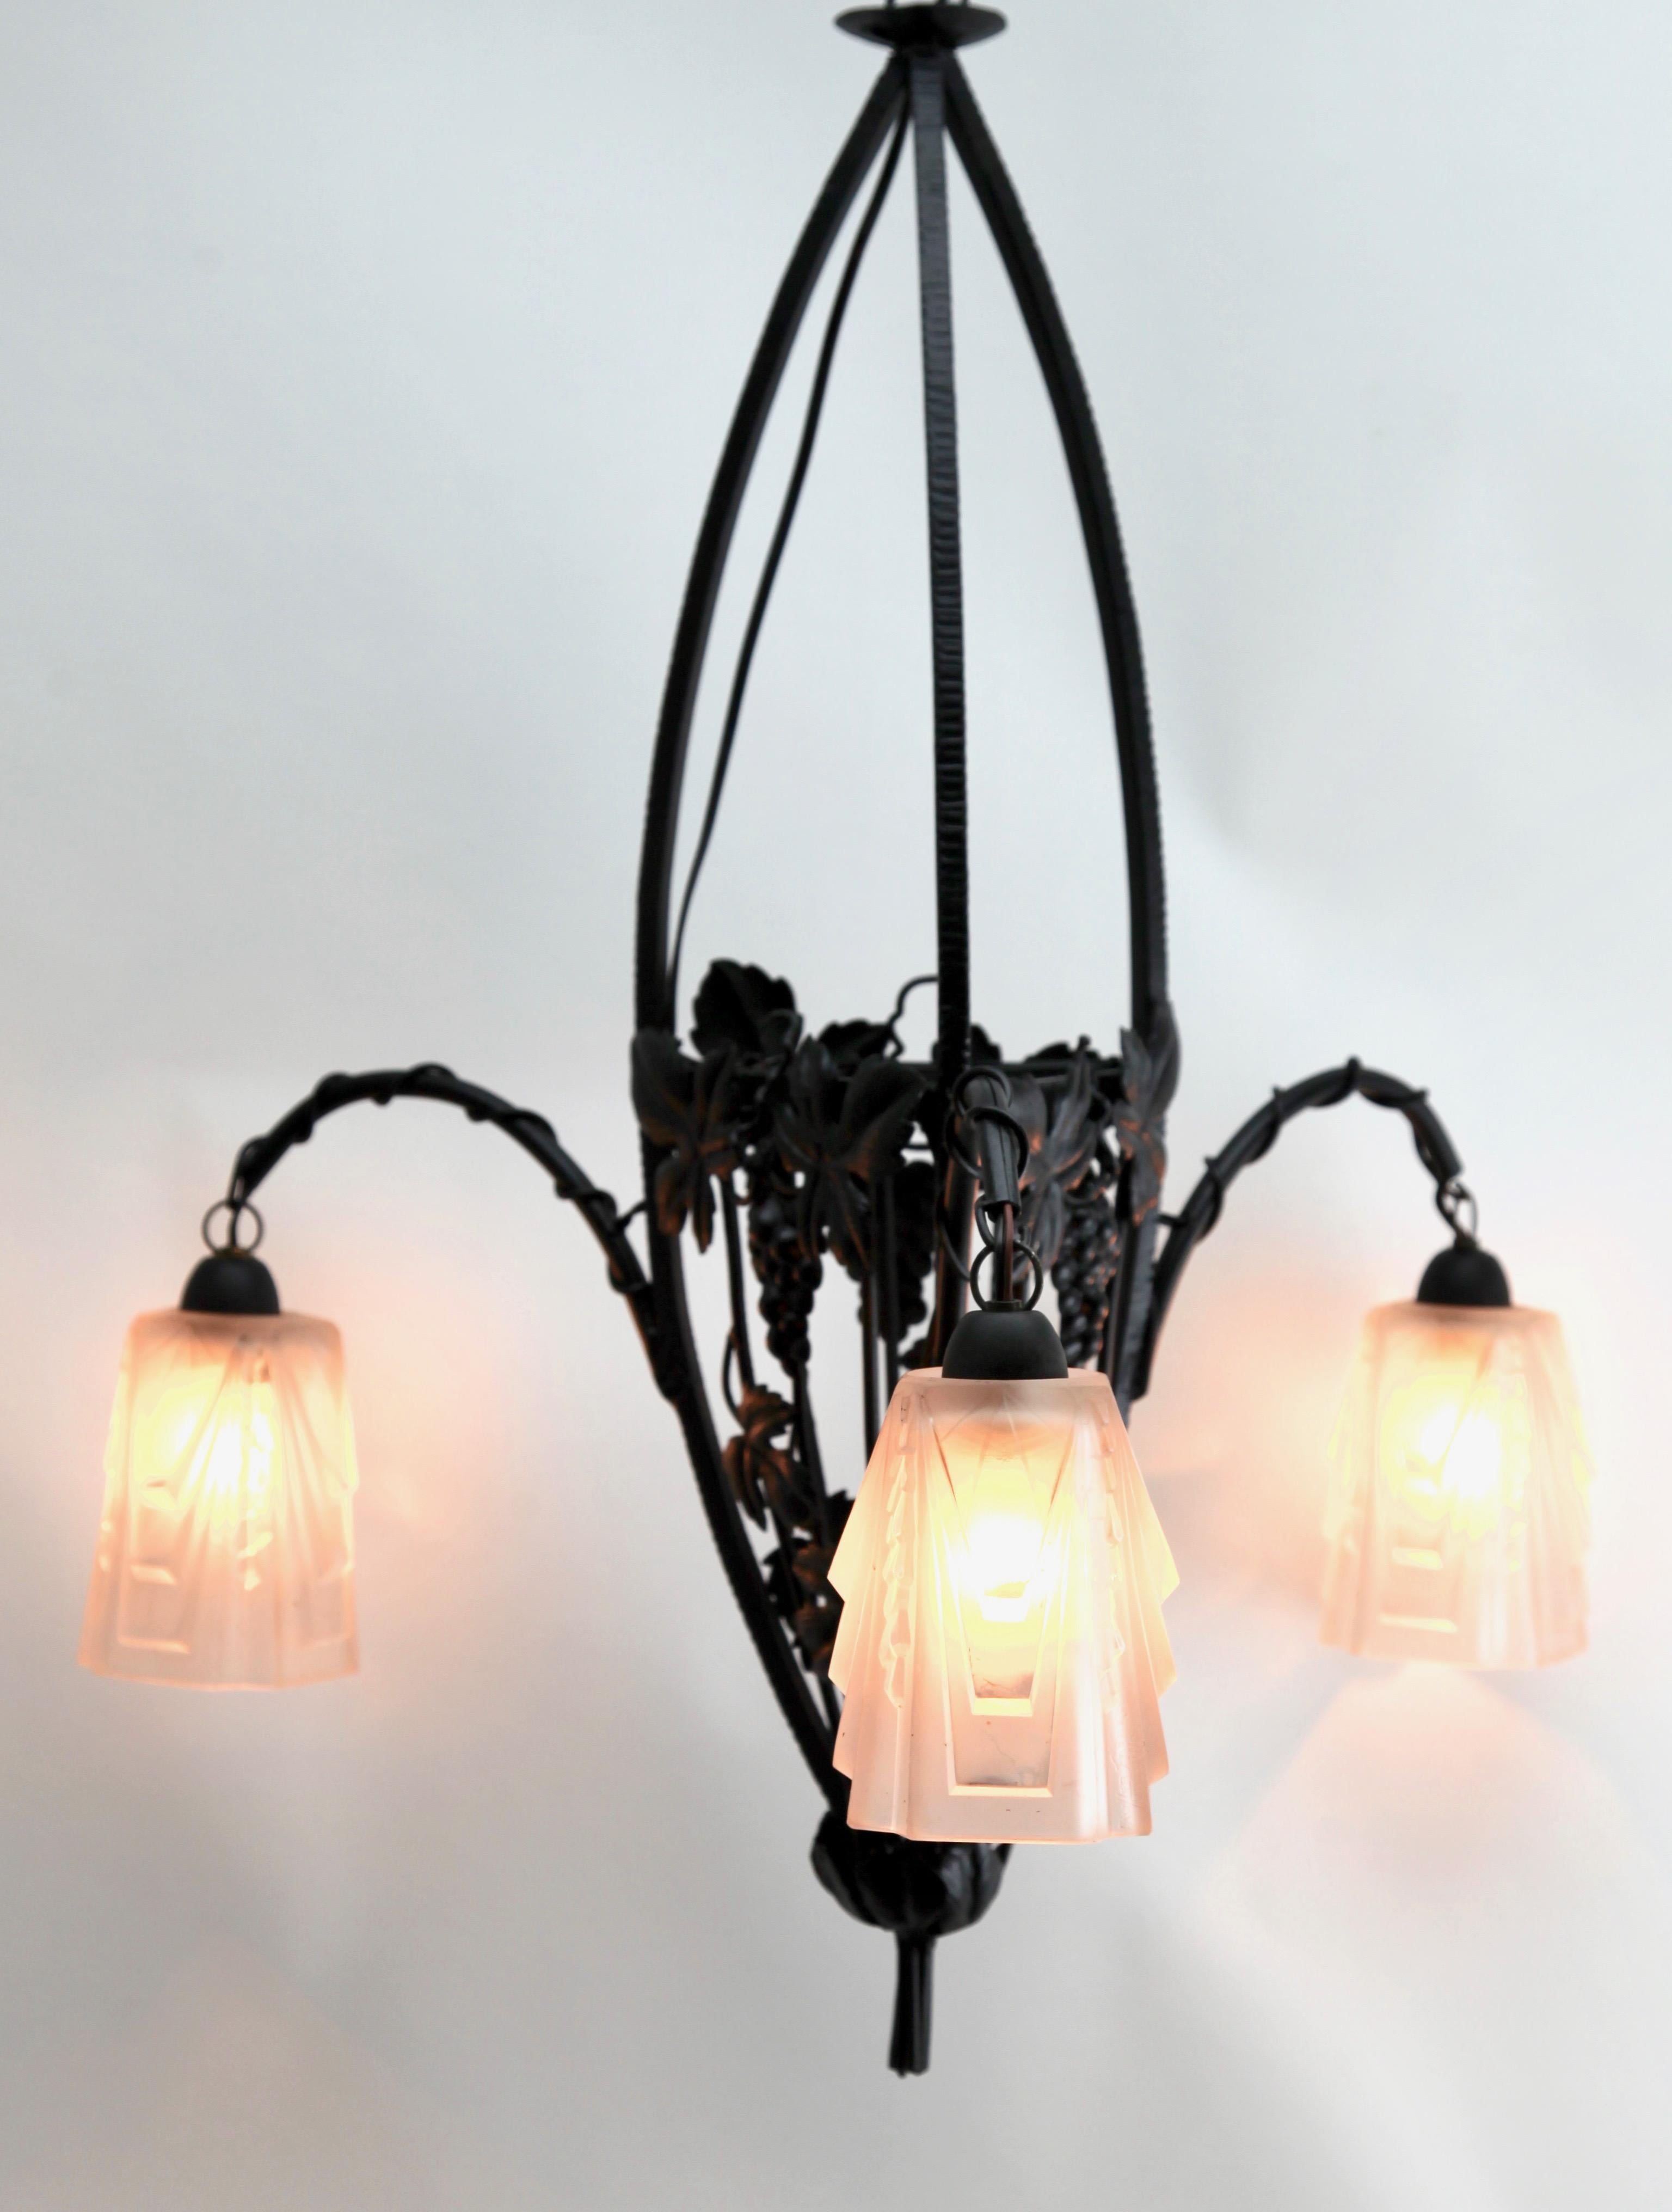 French Art Nouveau Chandelier by Muller Freres Luneville, Schades Are Signed, 1900s For Sale